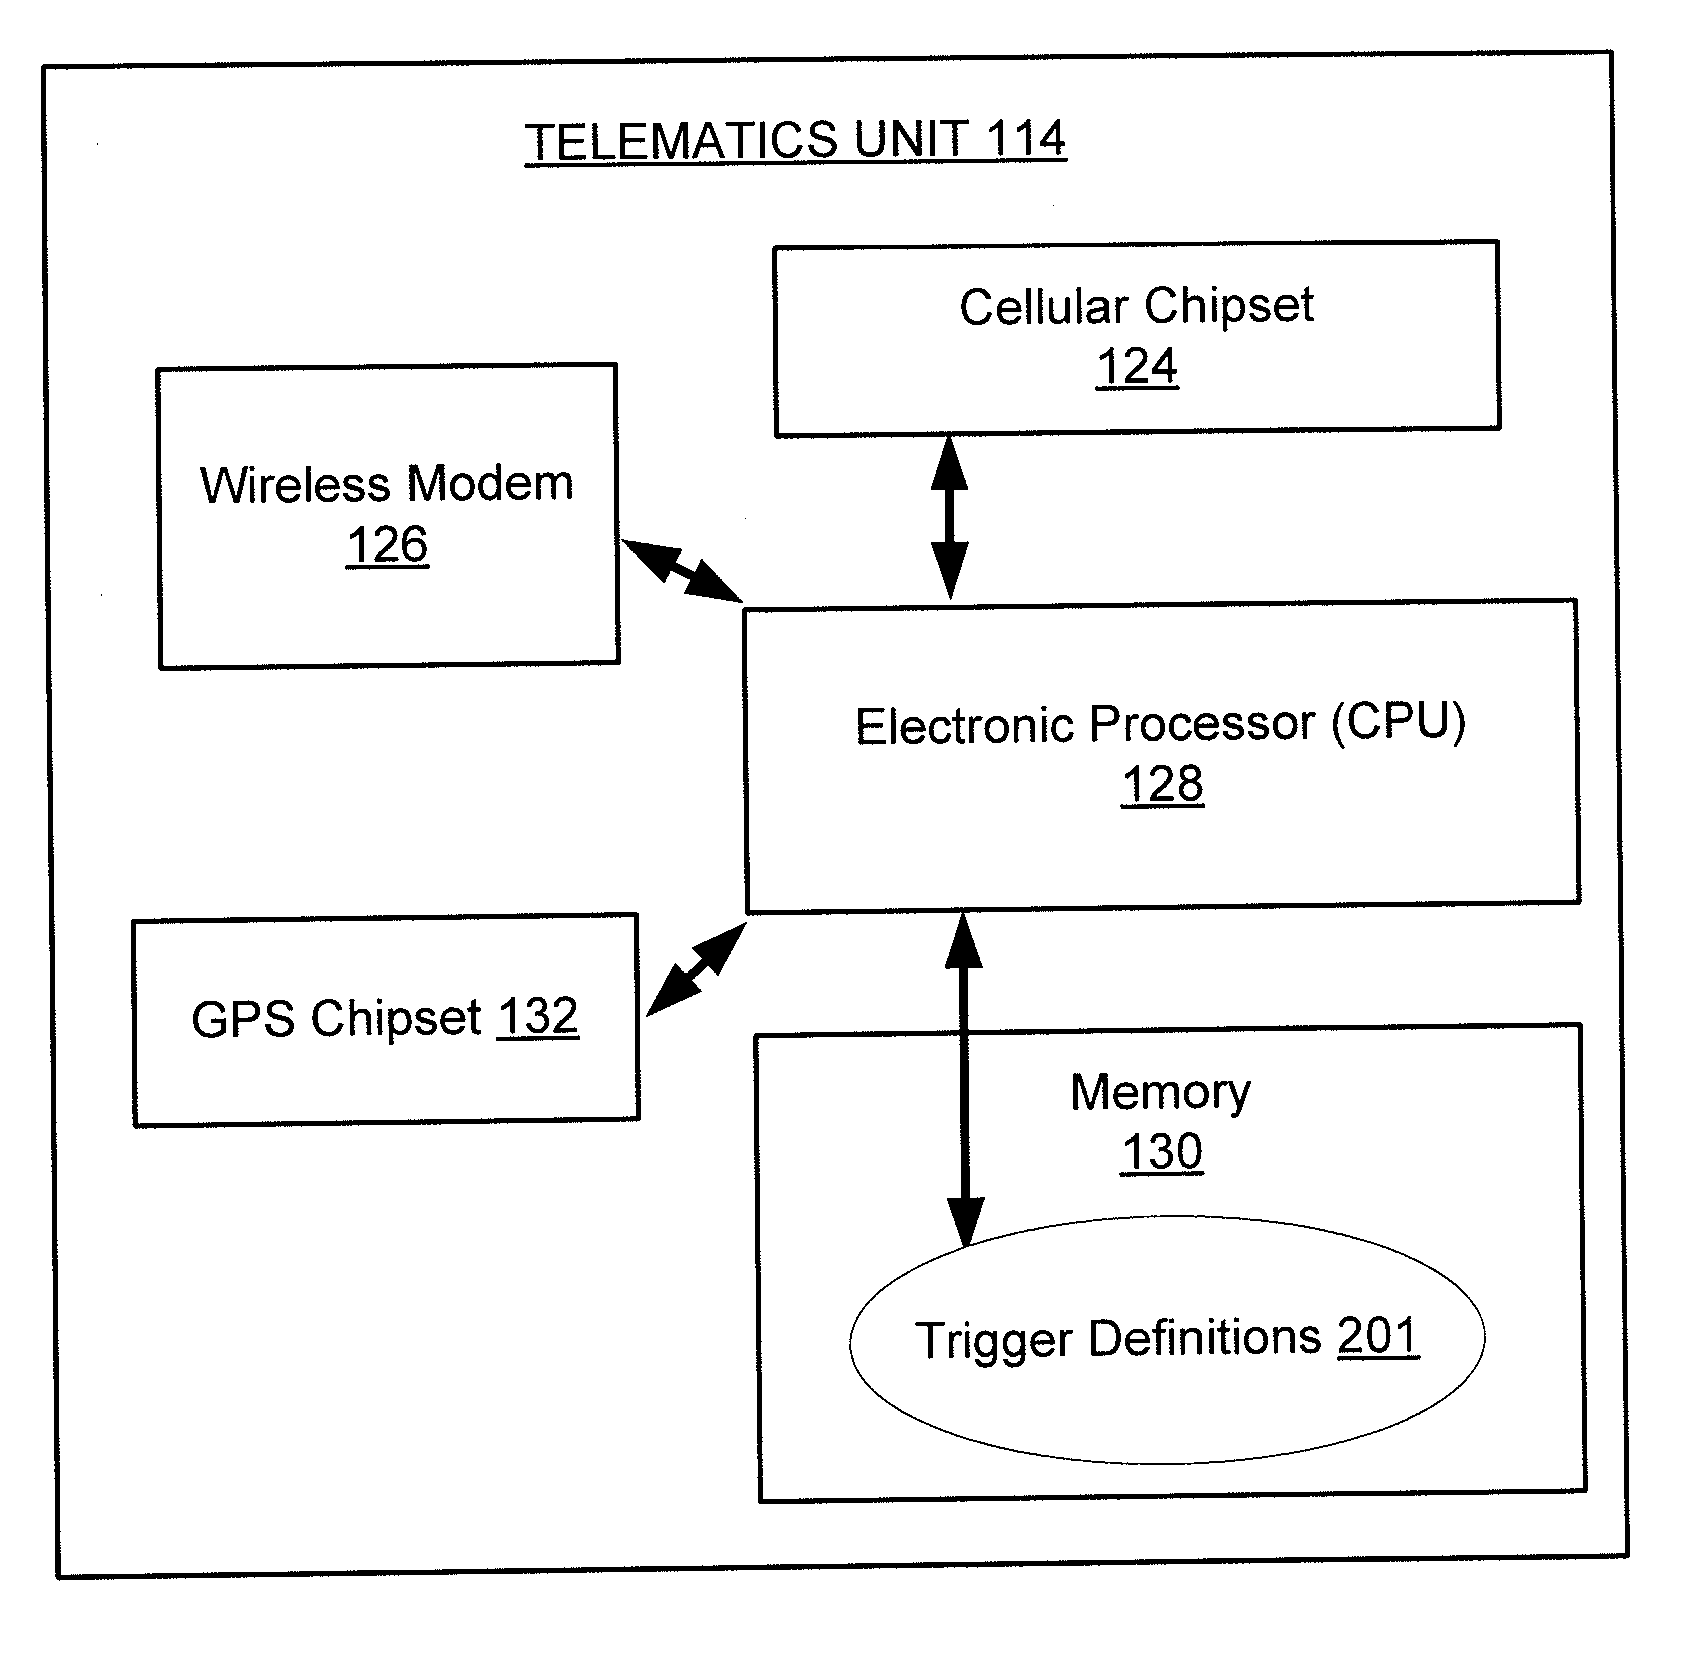 Enhanced mobile network system acquisition using scanning triggers